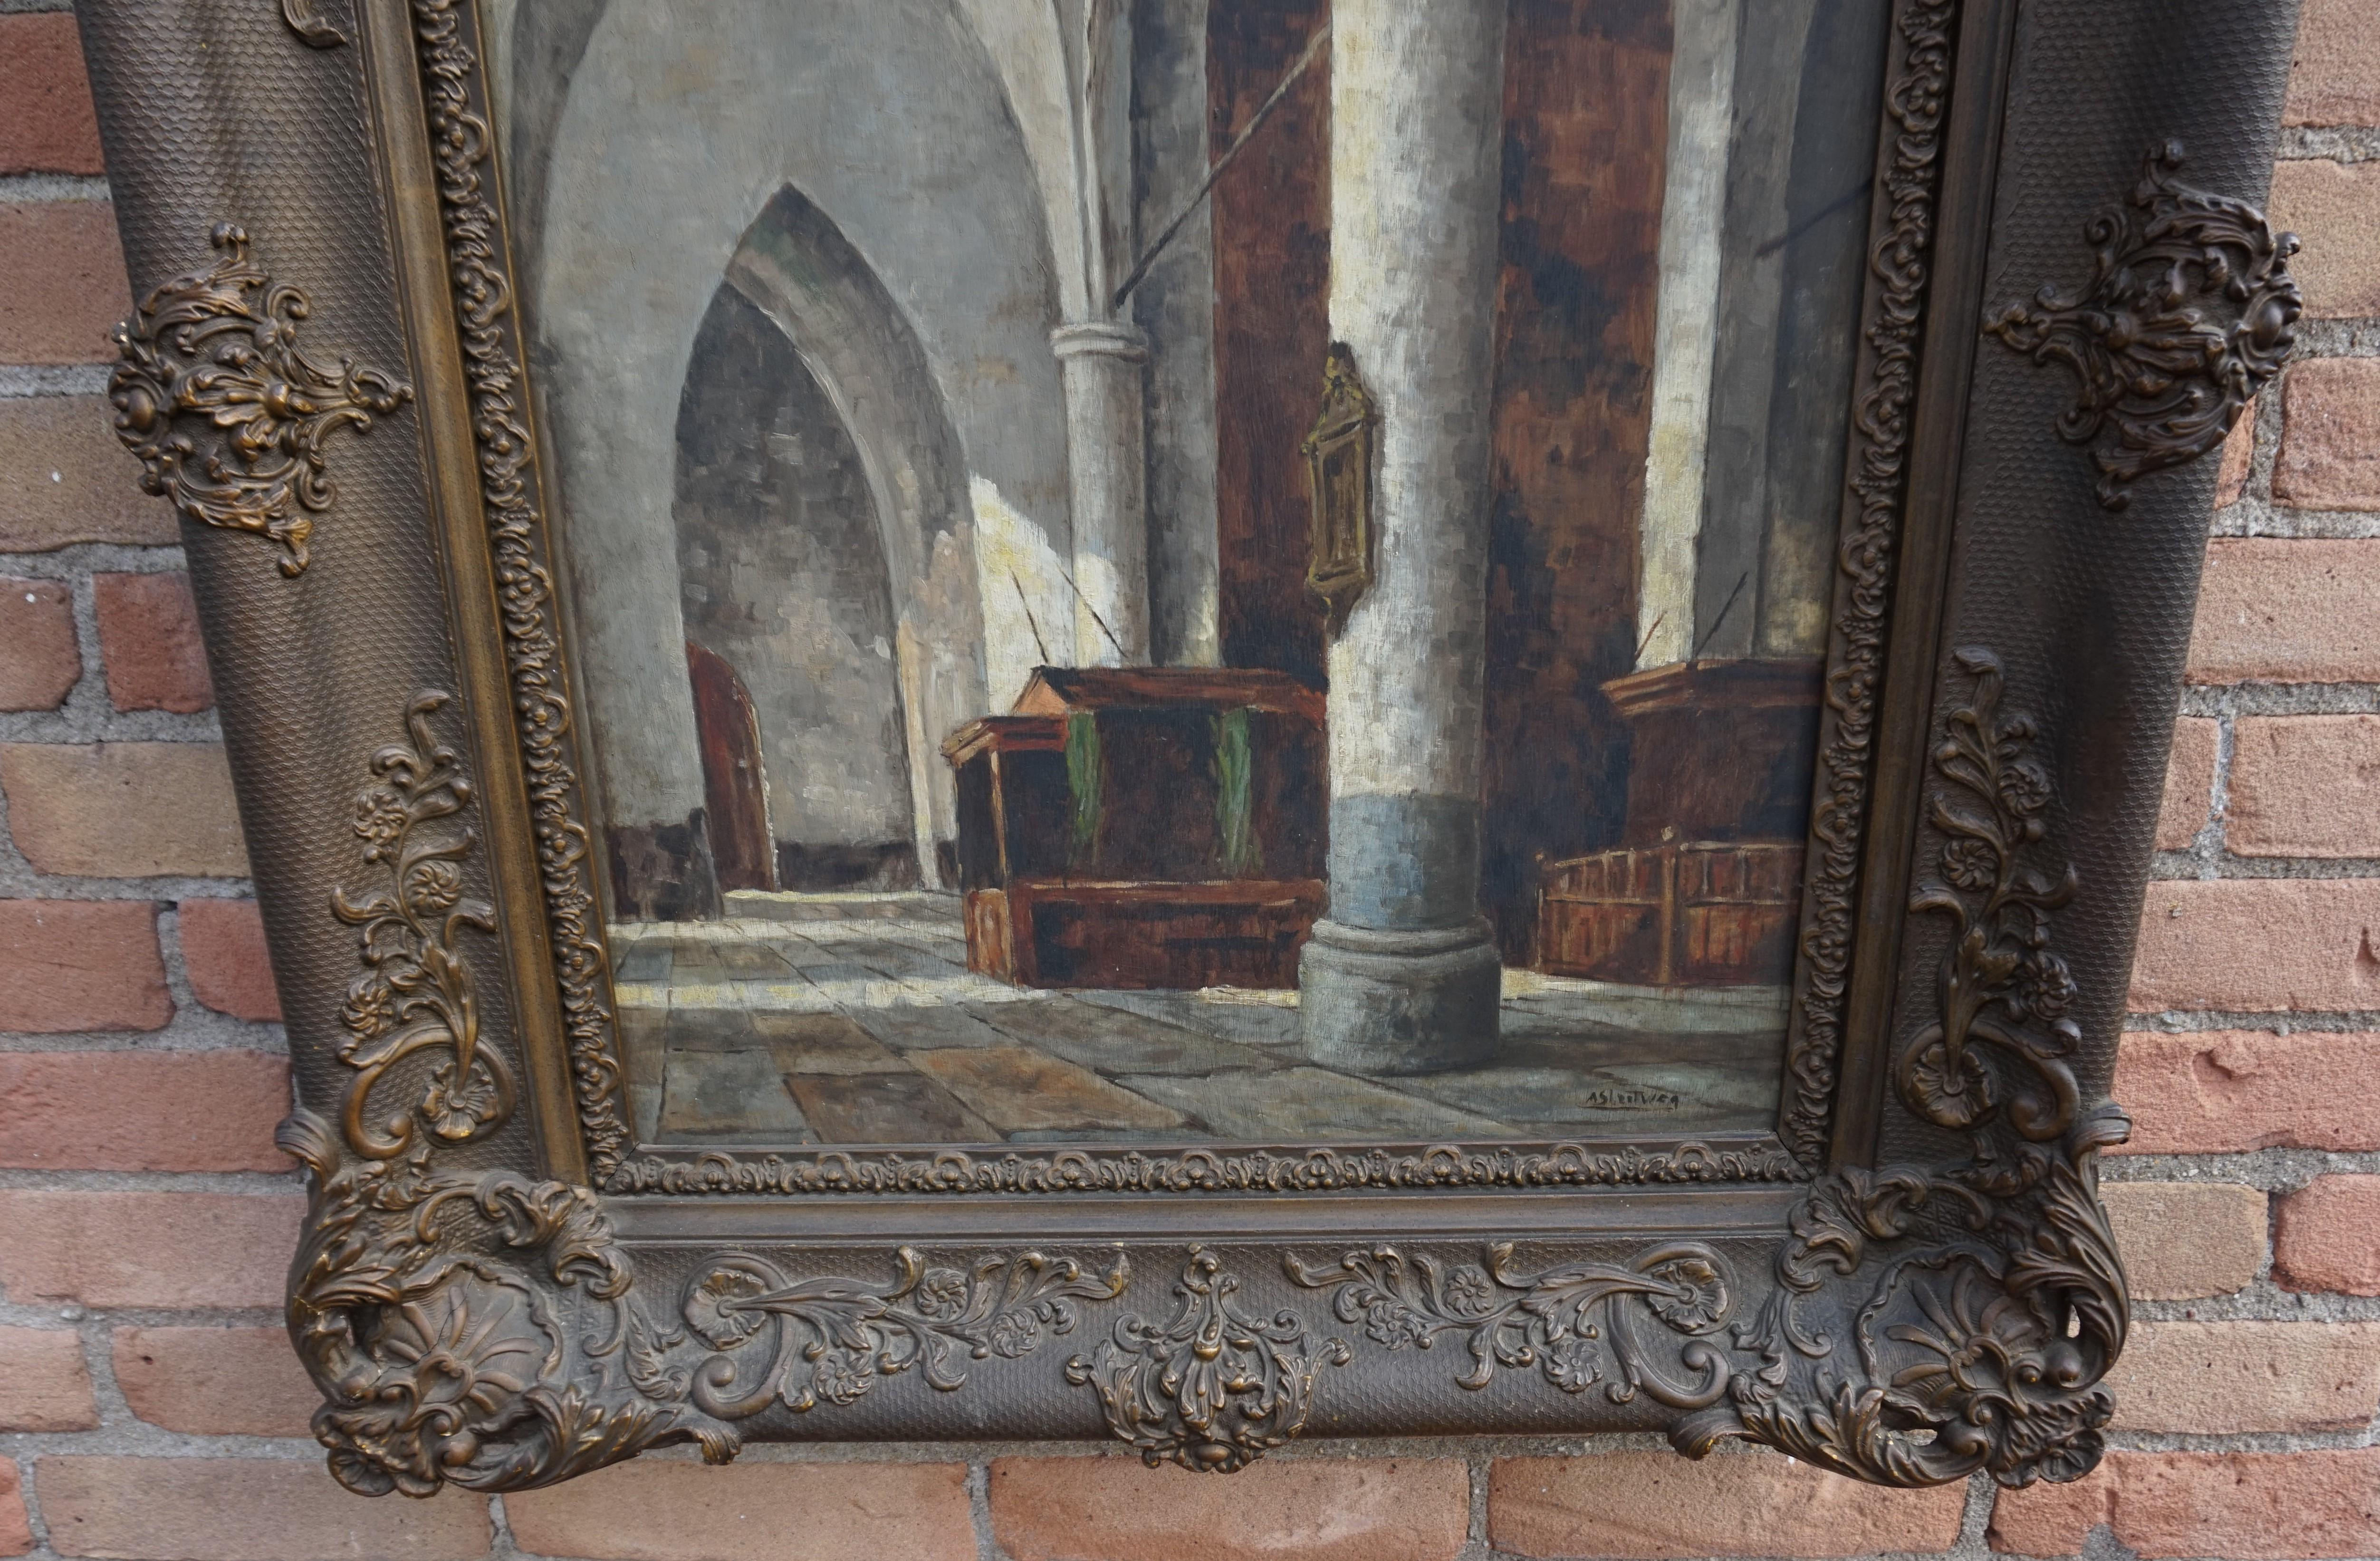 Gothic Revival Antique and Unique Gothic Church Interior Painting in a Stunning Mid-1800s Frame